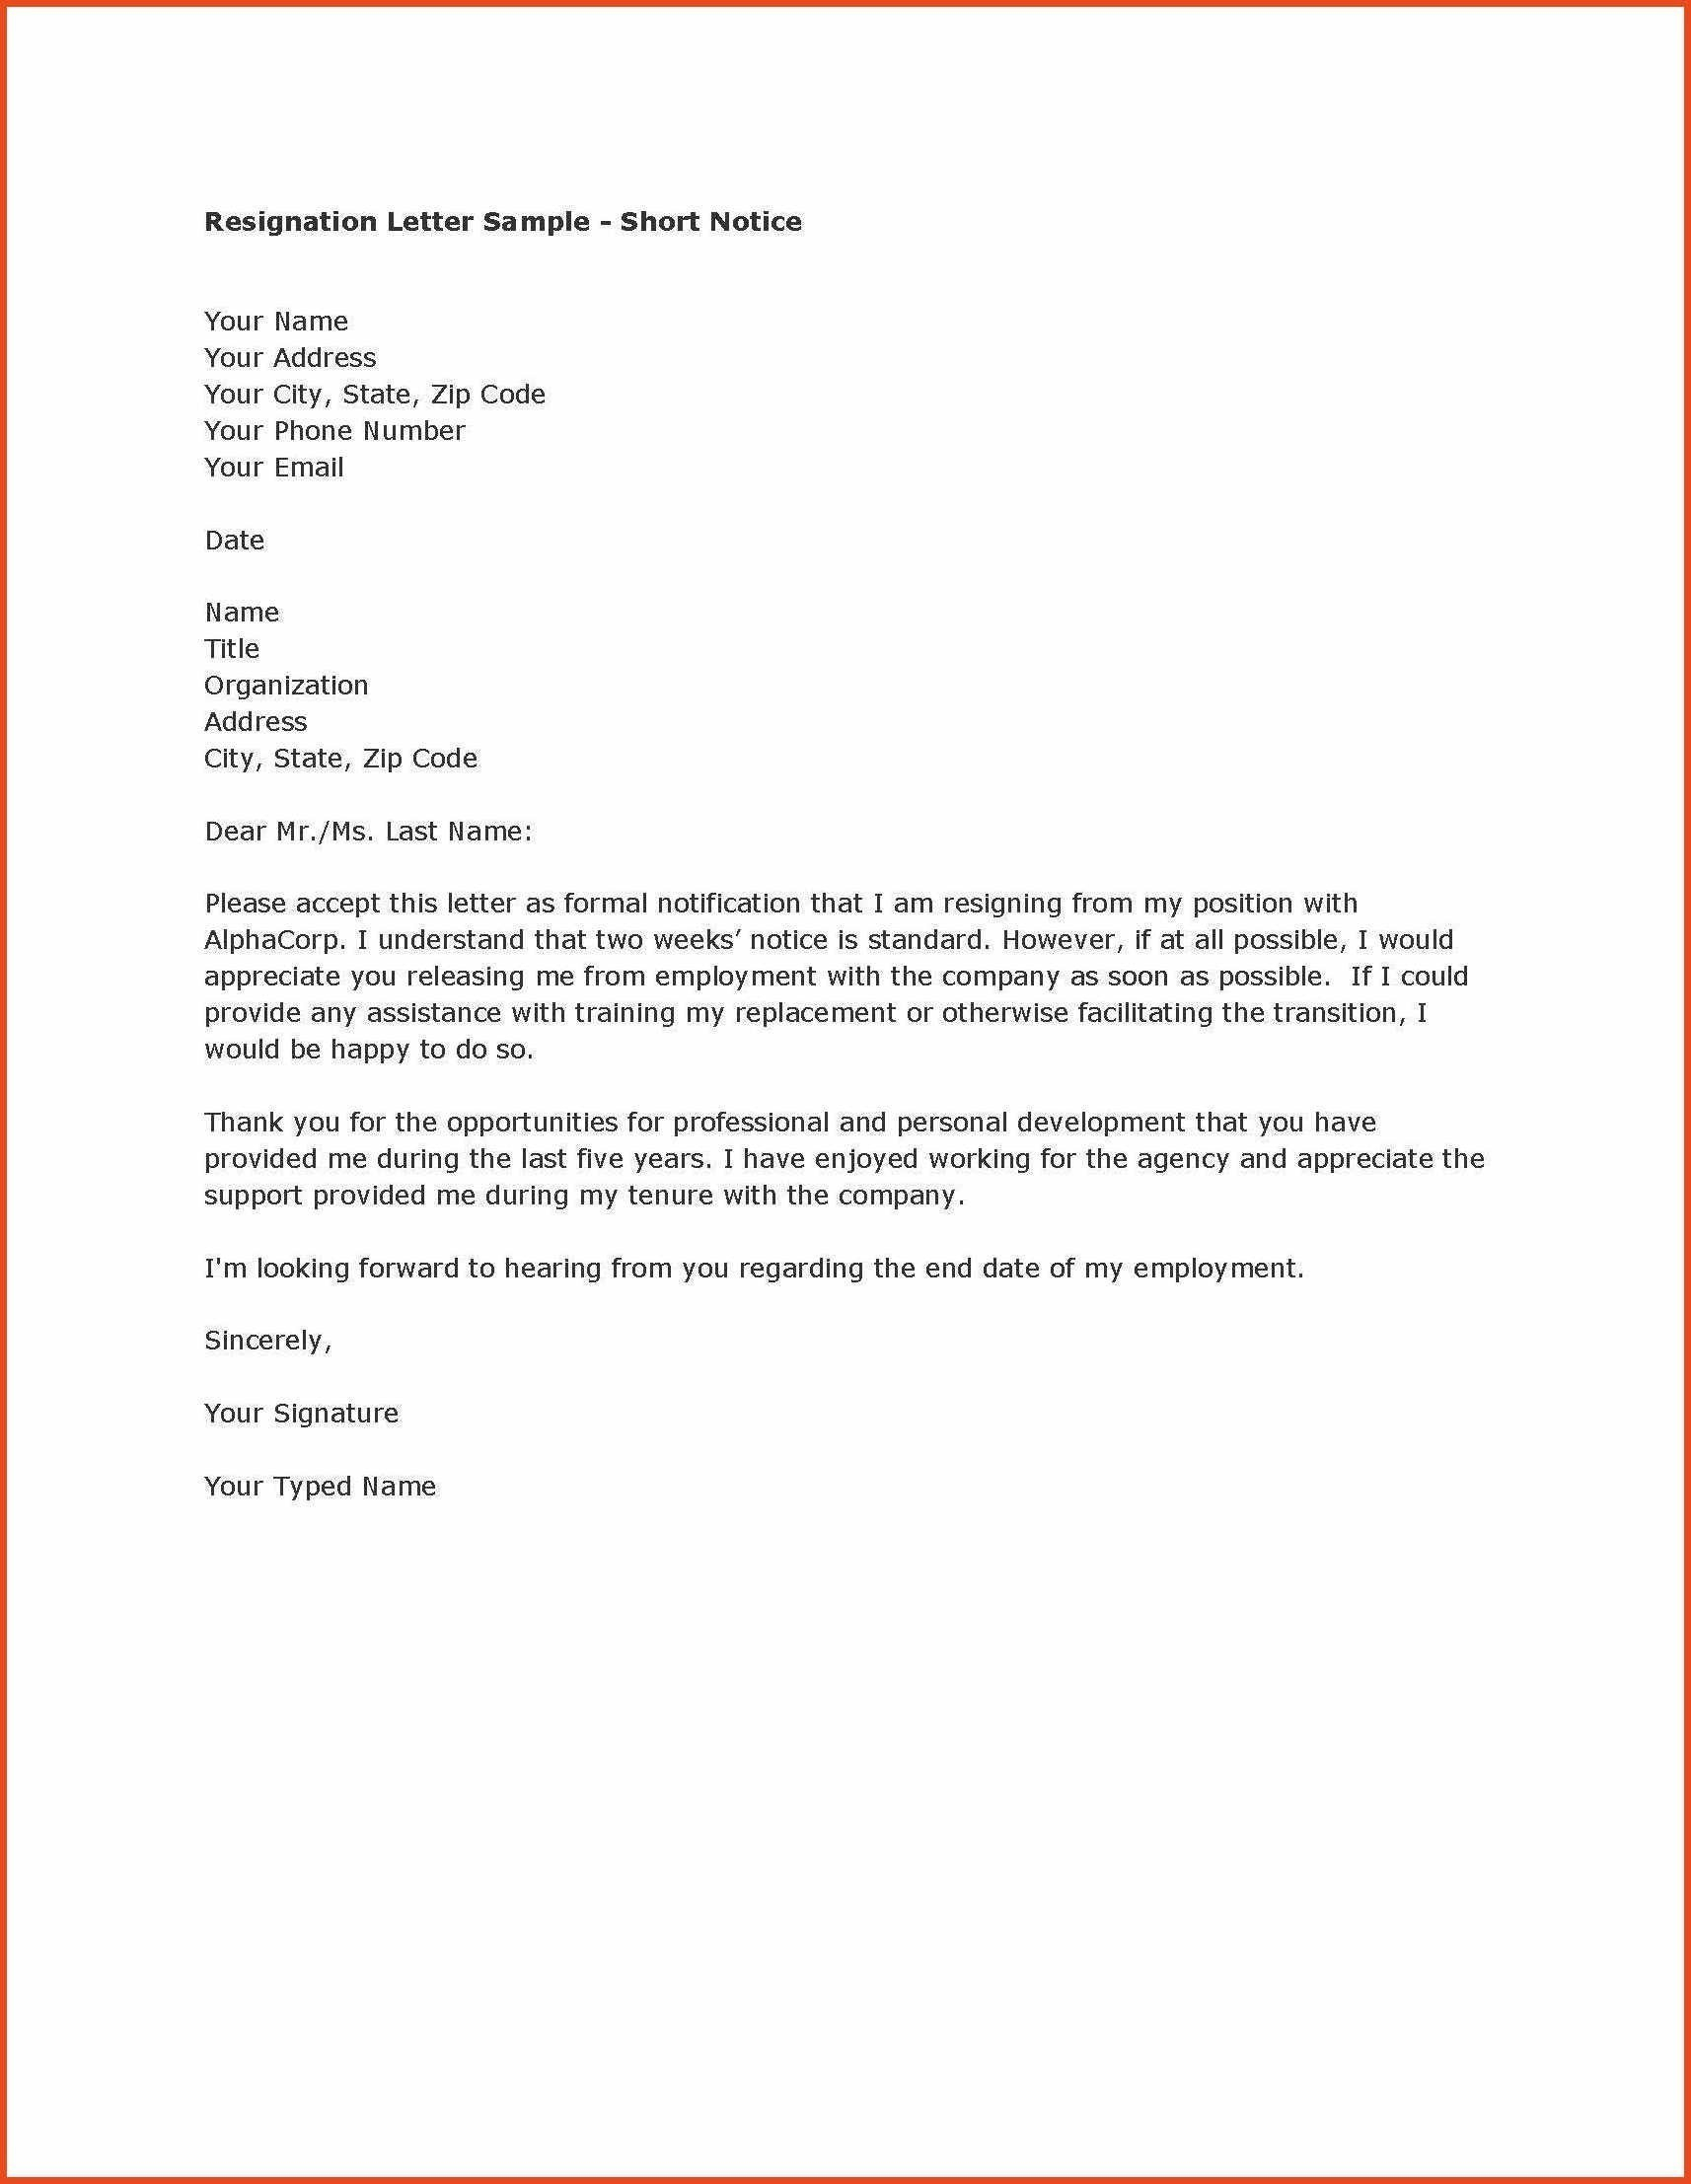 Resignation Letter Free Template Download - Relieving Letter format with Notice Period Fresh Sample Resignation